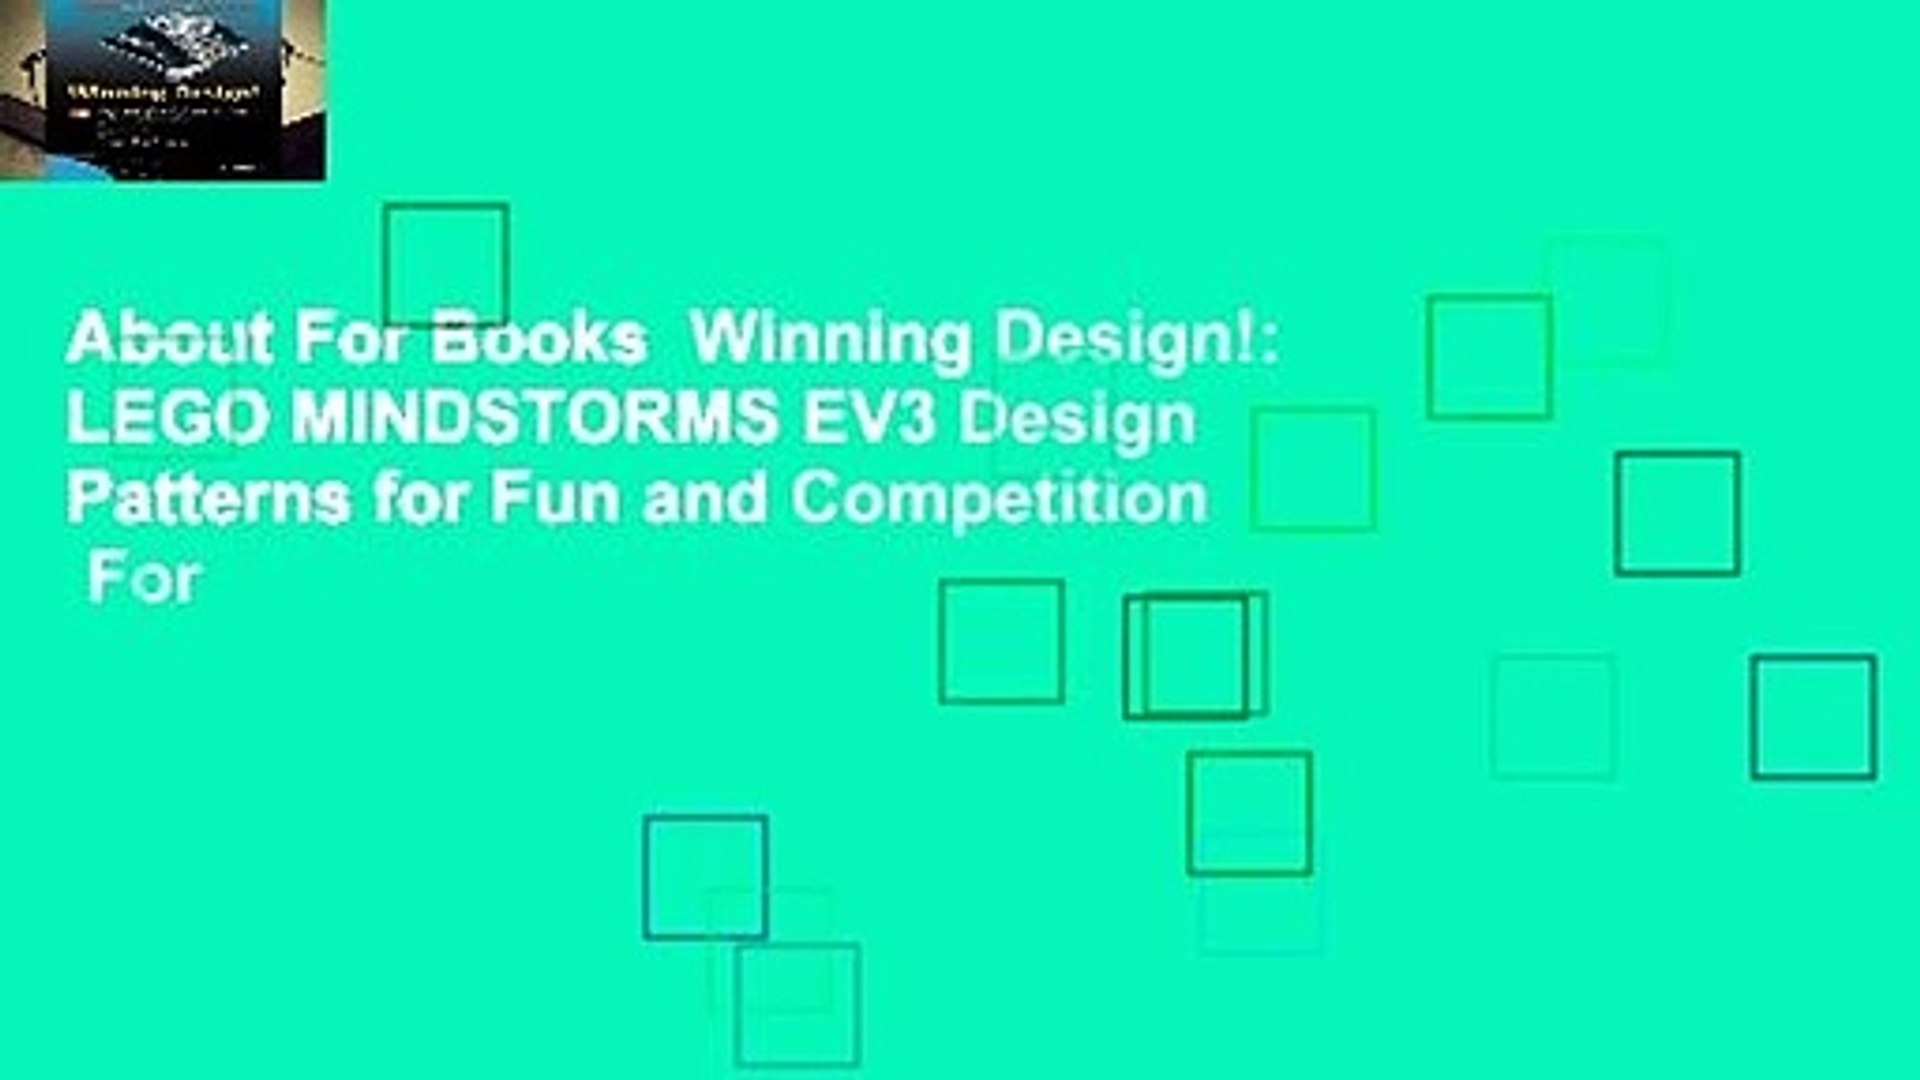 About For Books  Winning Design!: LEGO MINDSTORMS EV3 Design Patterns for Fun and Competition  For